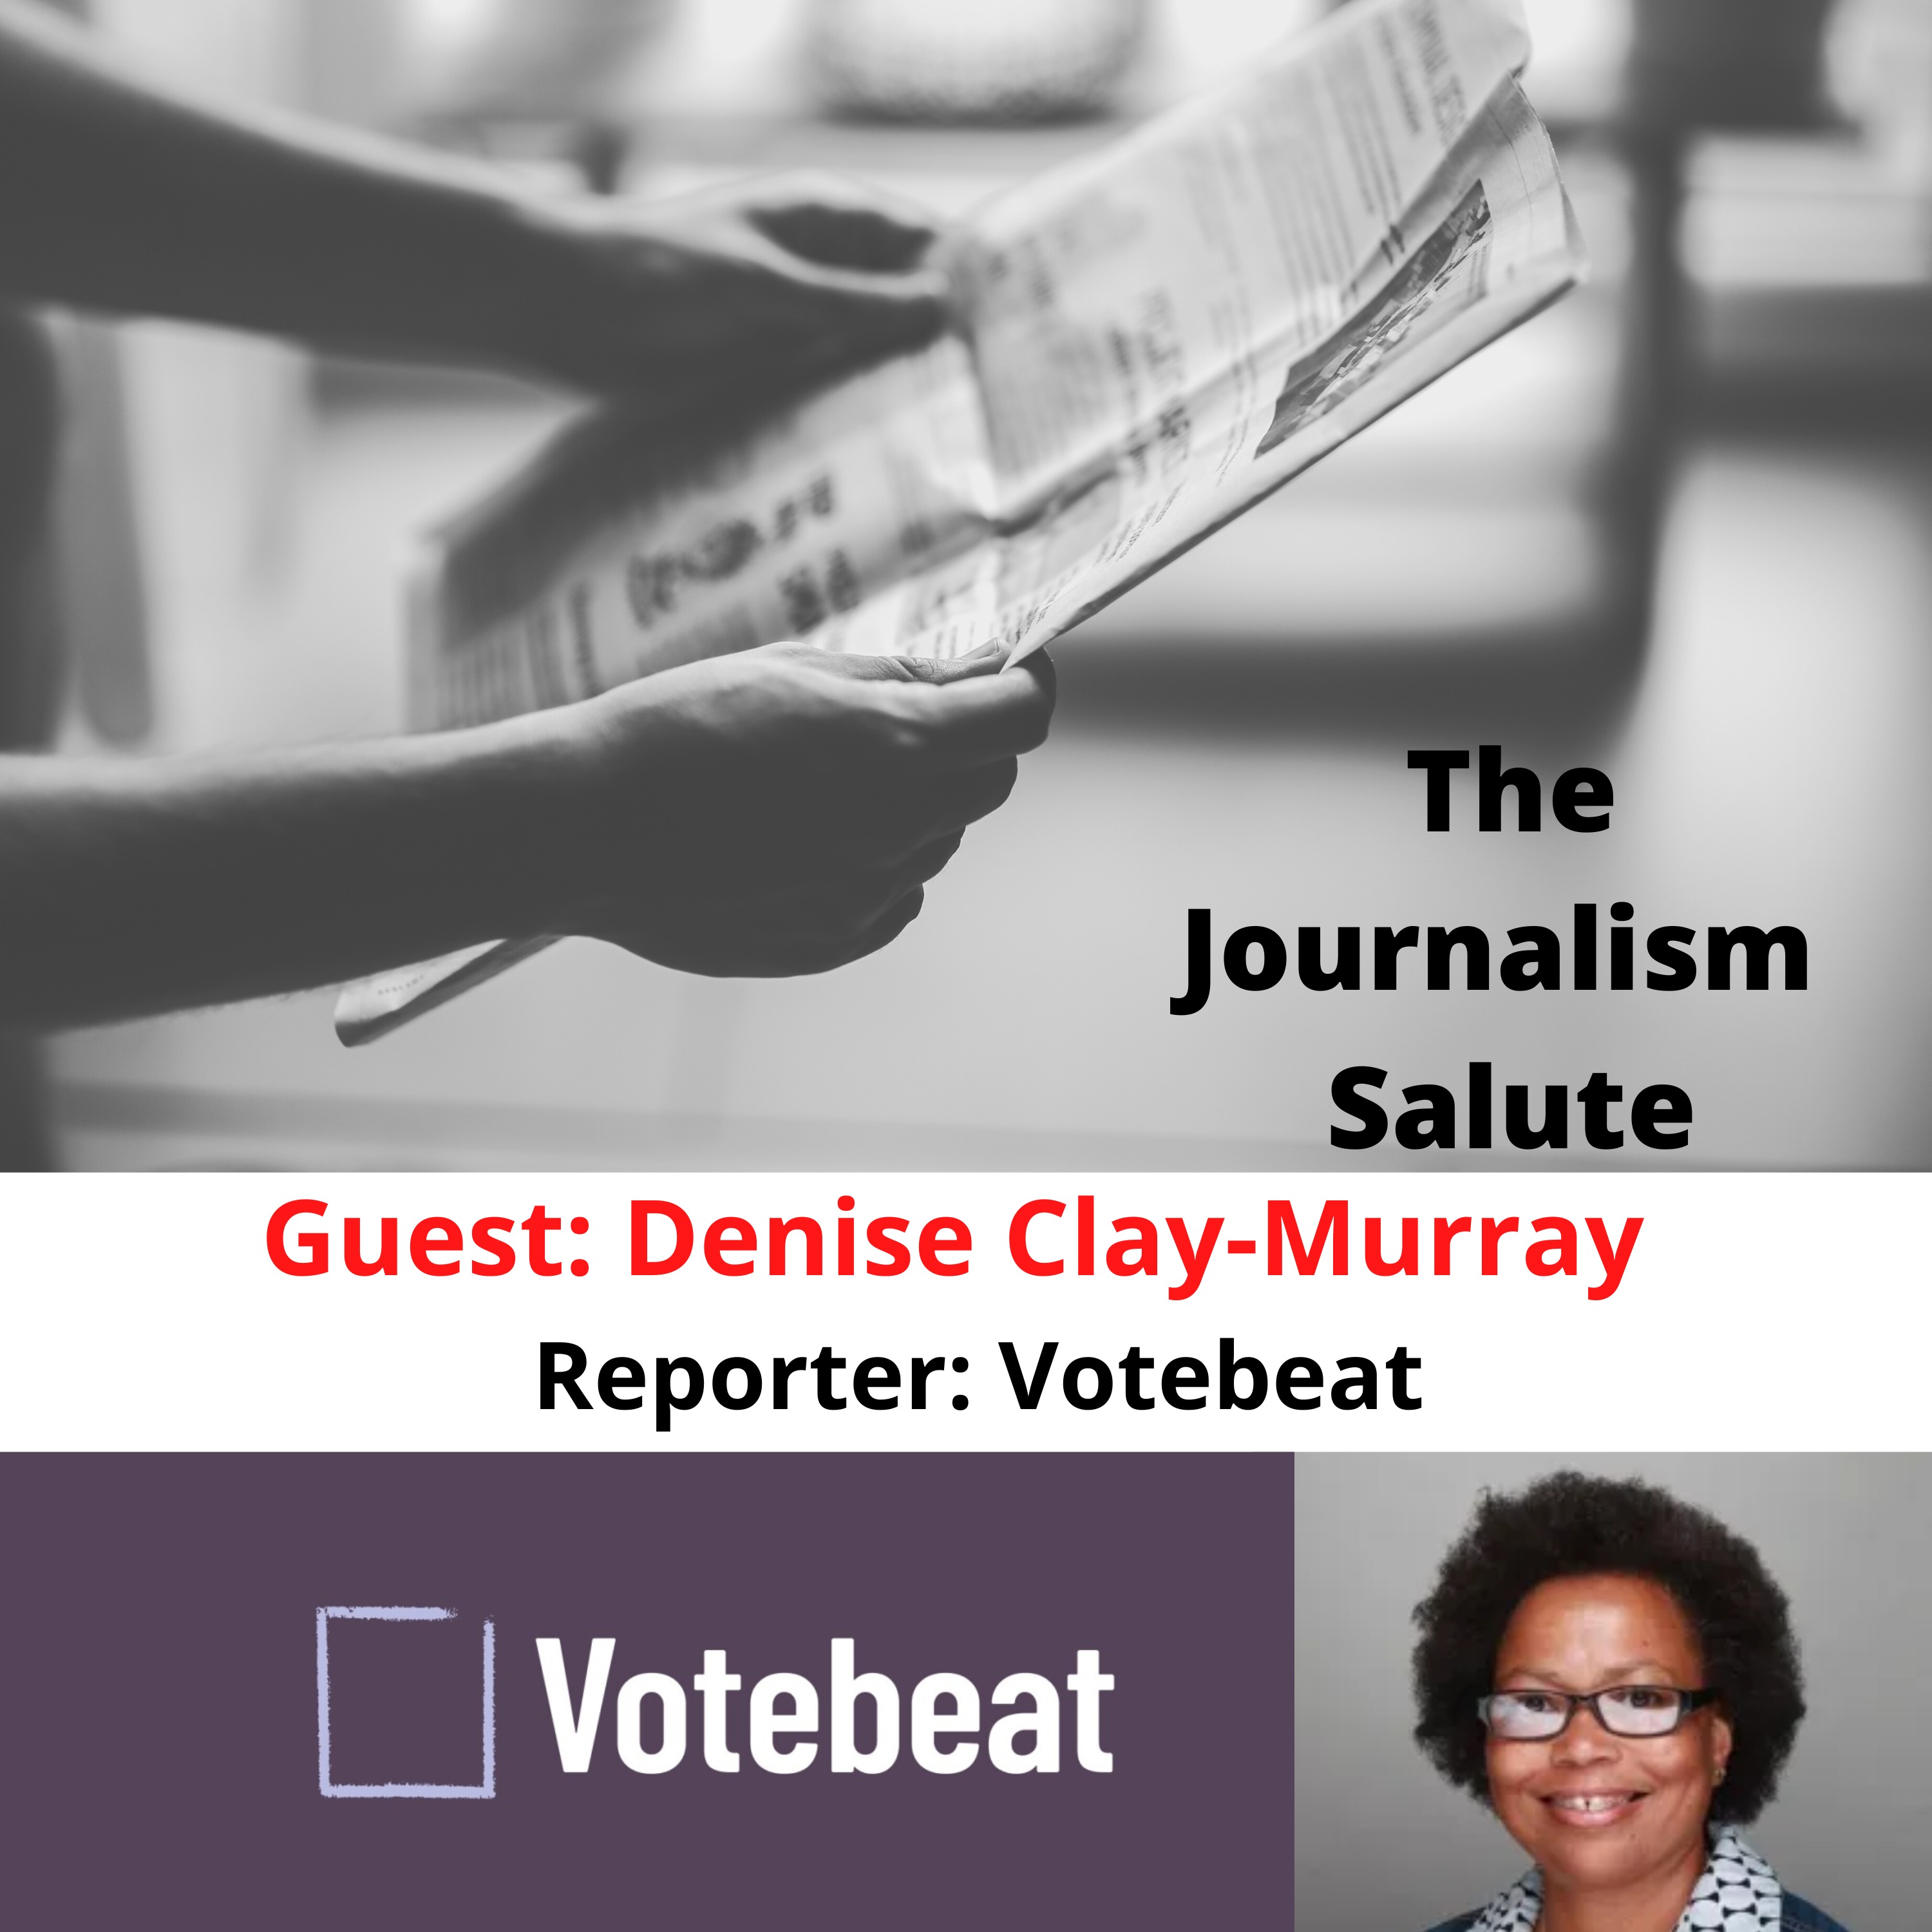 Denise Clay-Murray, Reporter: Votebeat